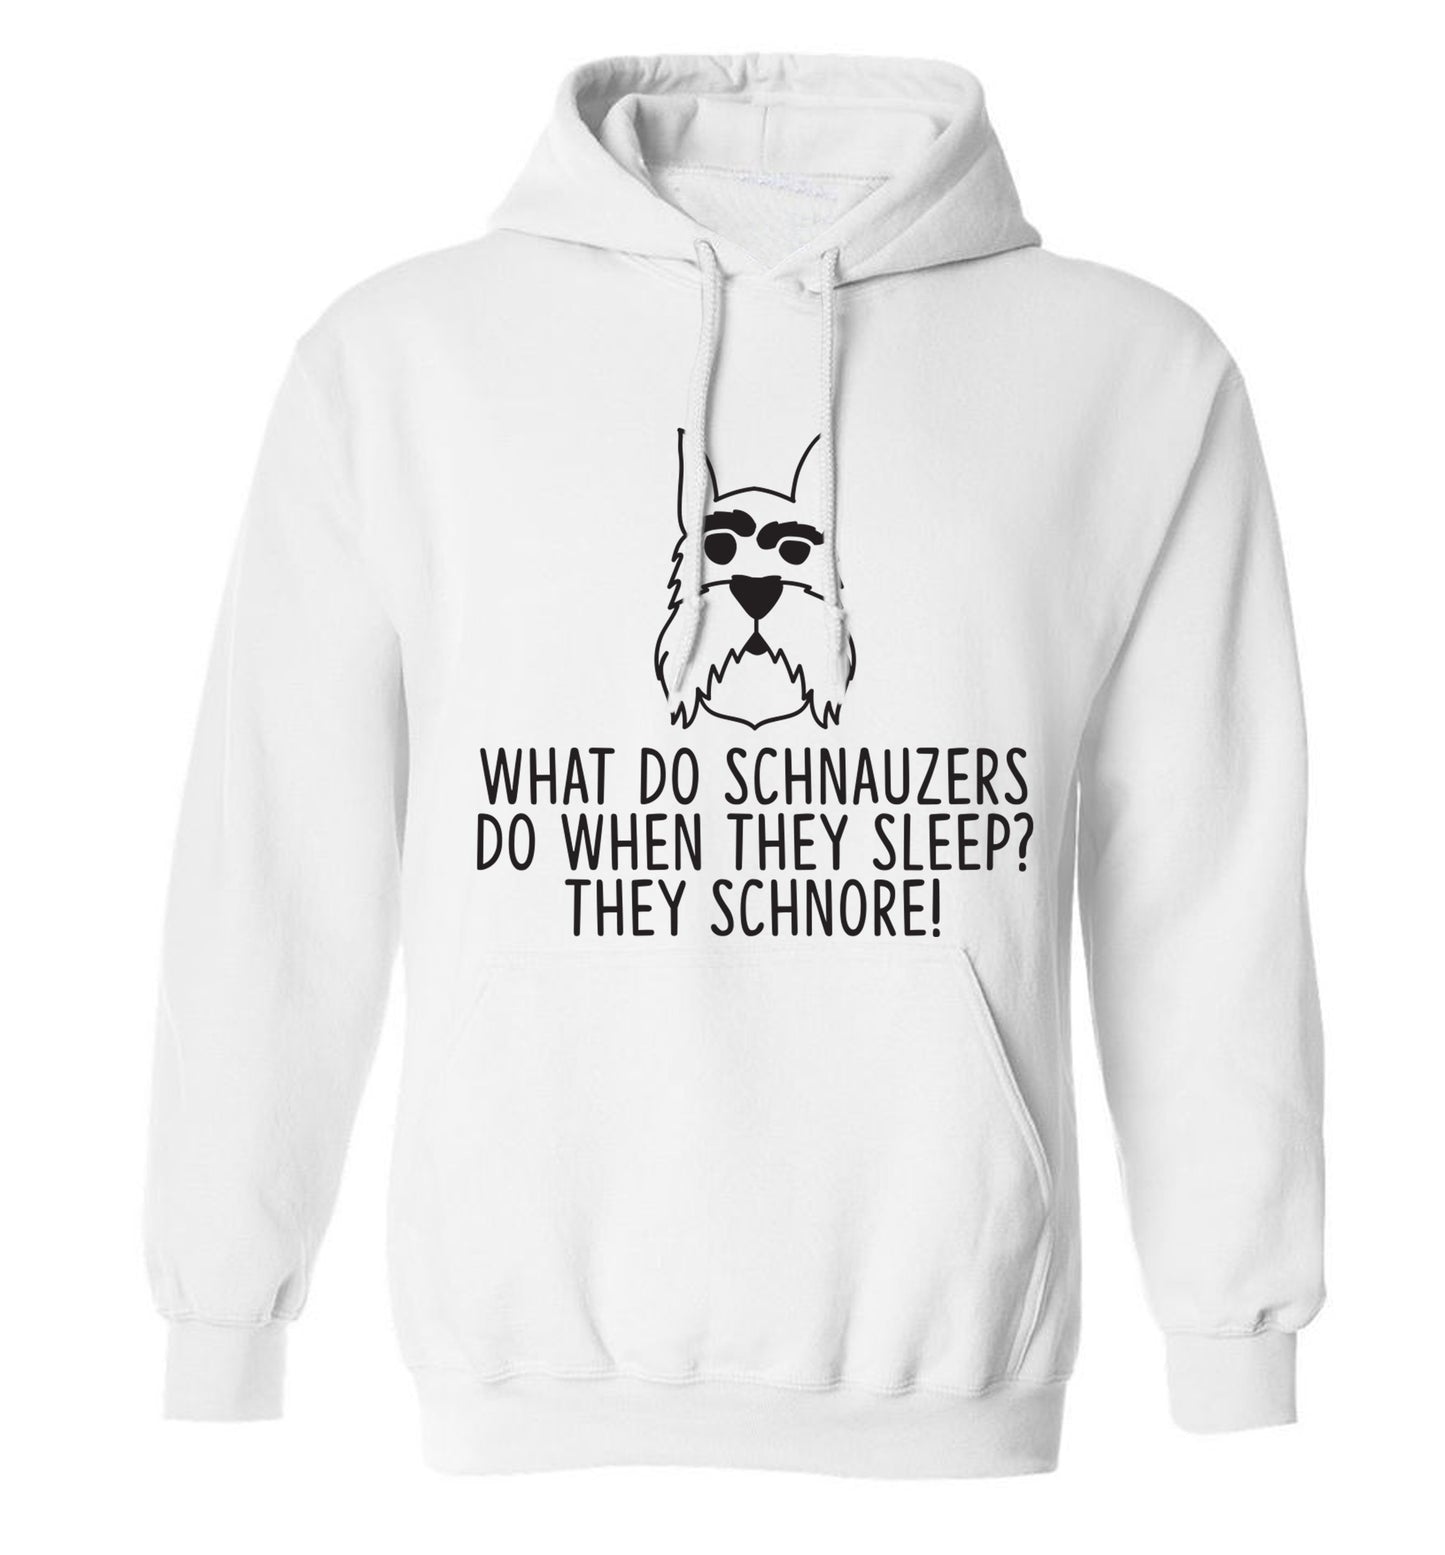 What do schnauzers do when they sleep? Schnore! adults unisex white hoodie 2XL